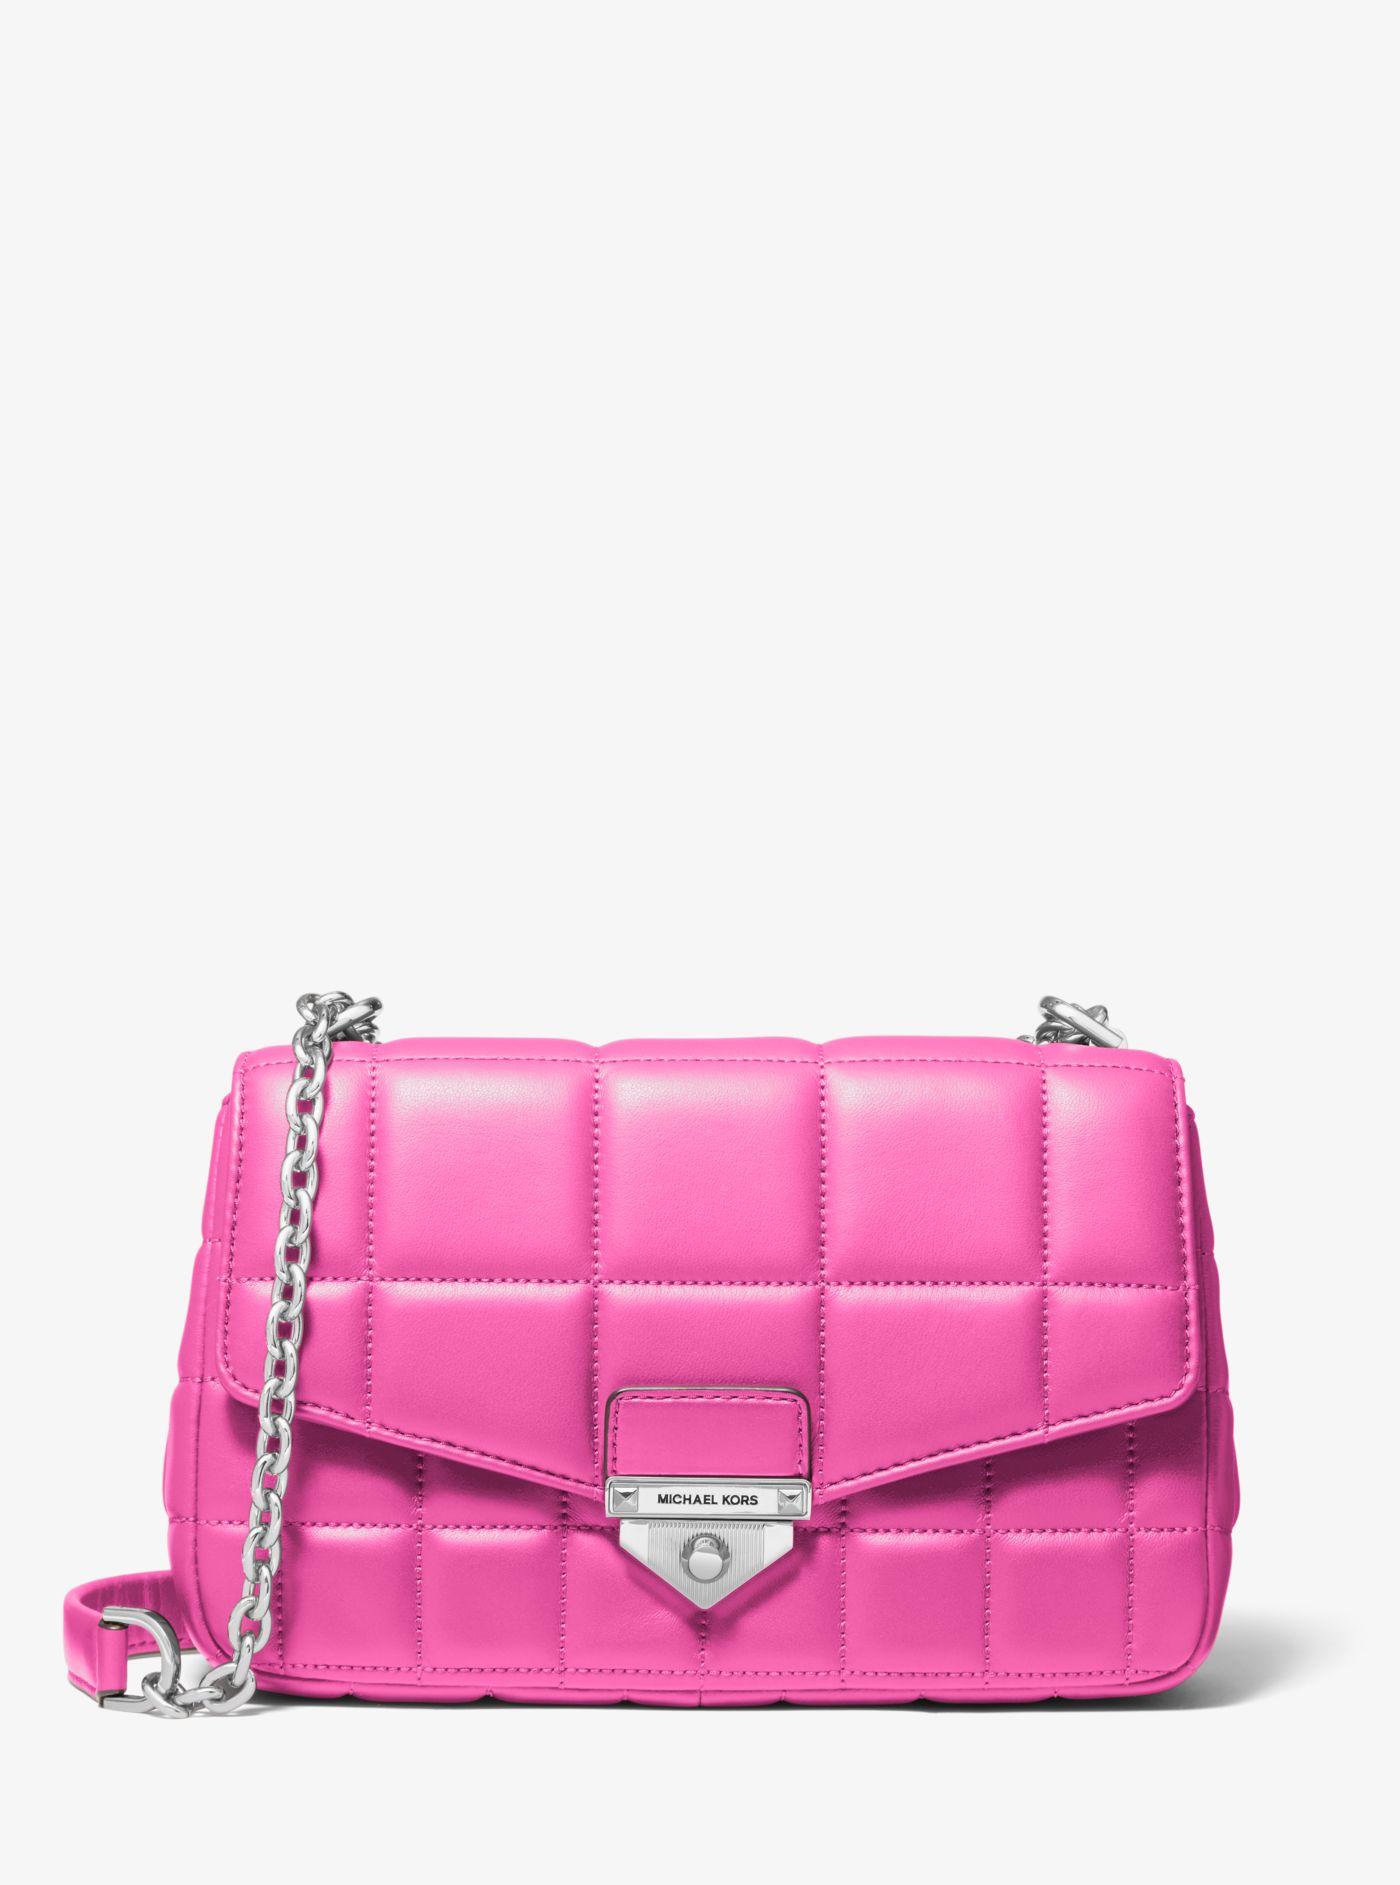 Michael Kors Soho Large Quilted Leather Shoulder Bag in Pink | Lyst